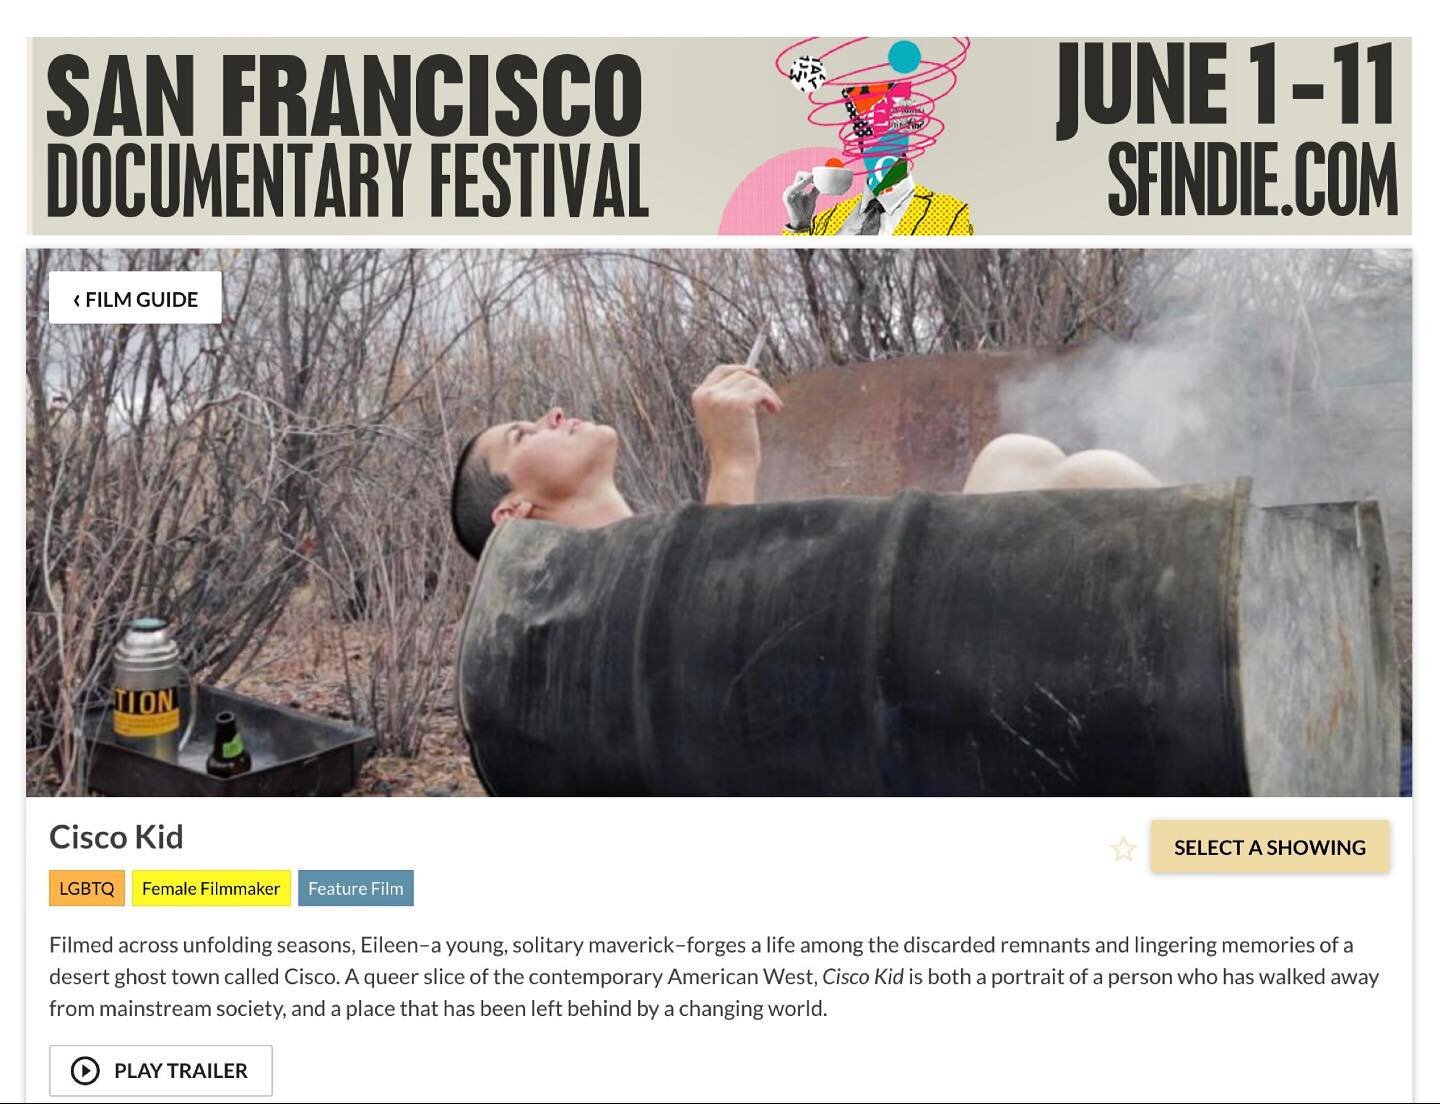 Cisco Kid will be playing at SF Doc Fest! 💥 The film will screen at The Roxie Theater on June 4th at 9pm. 
🌁🌉
It will also be available online from 6/1 - 6/11 for all of you who don&rsquo;t live in SF. :)